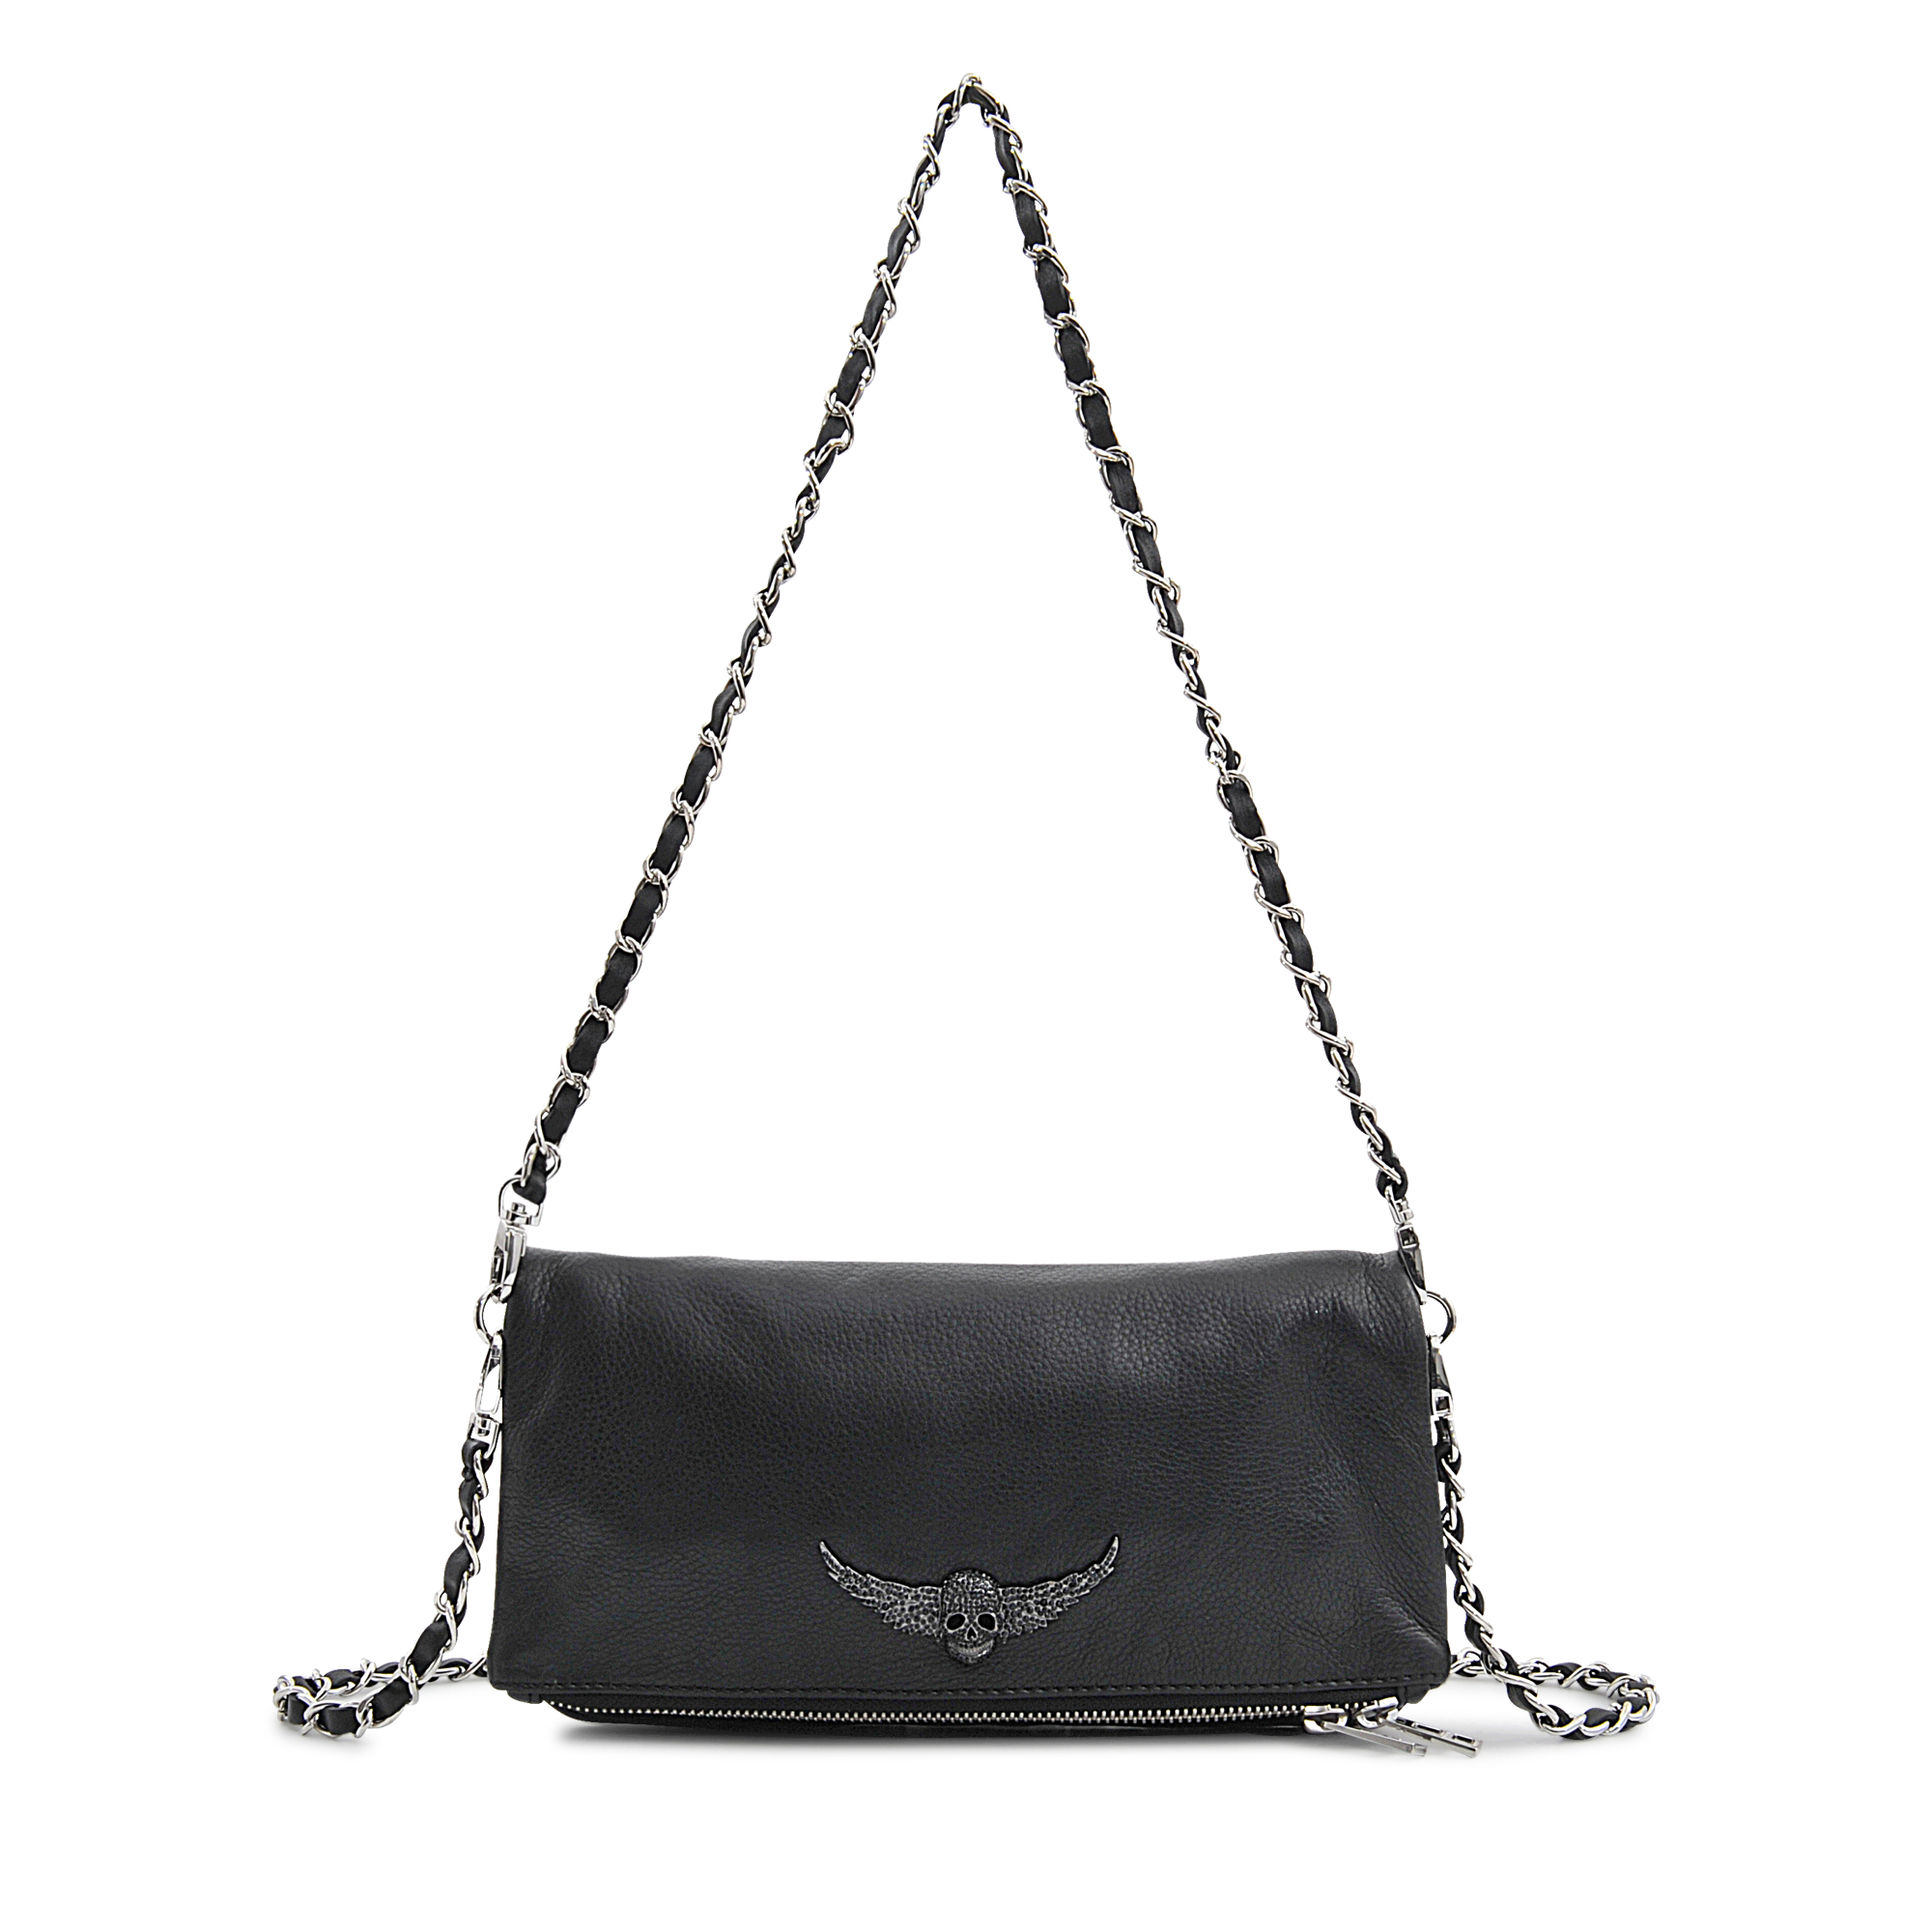 Zadig & Voltaire Leather Rock Clutch in Black - Lyst